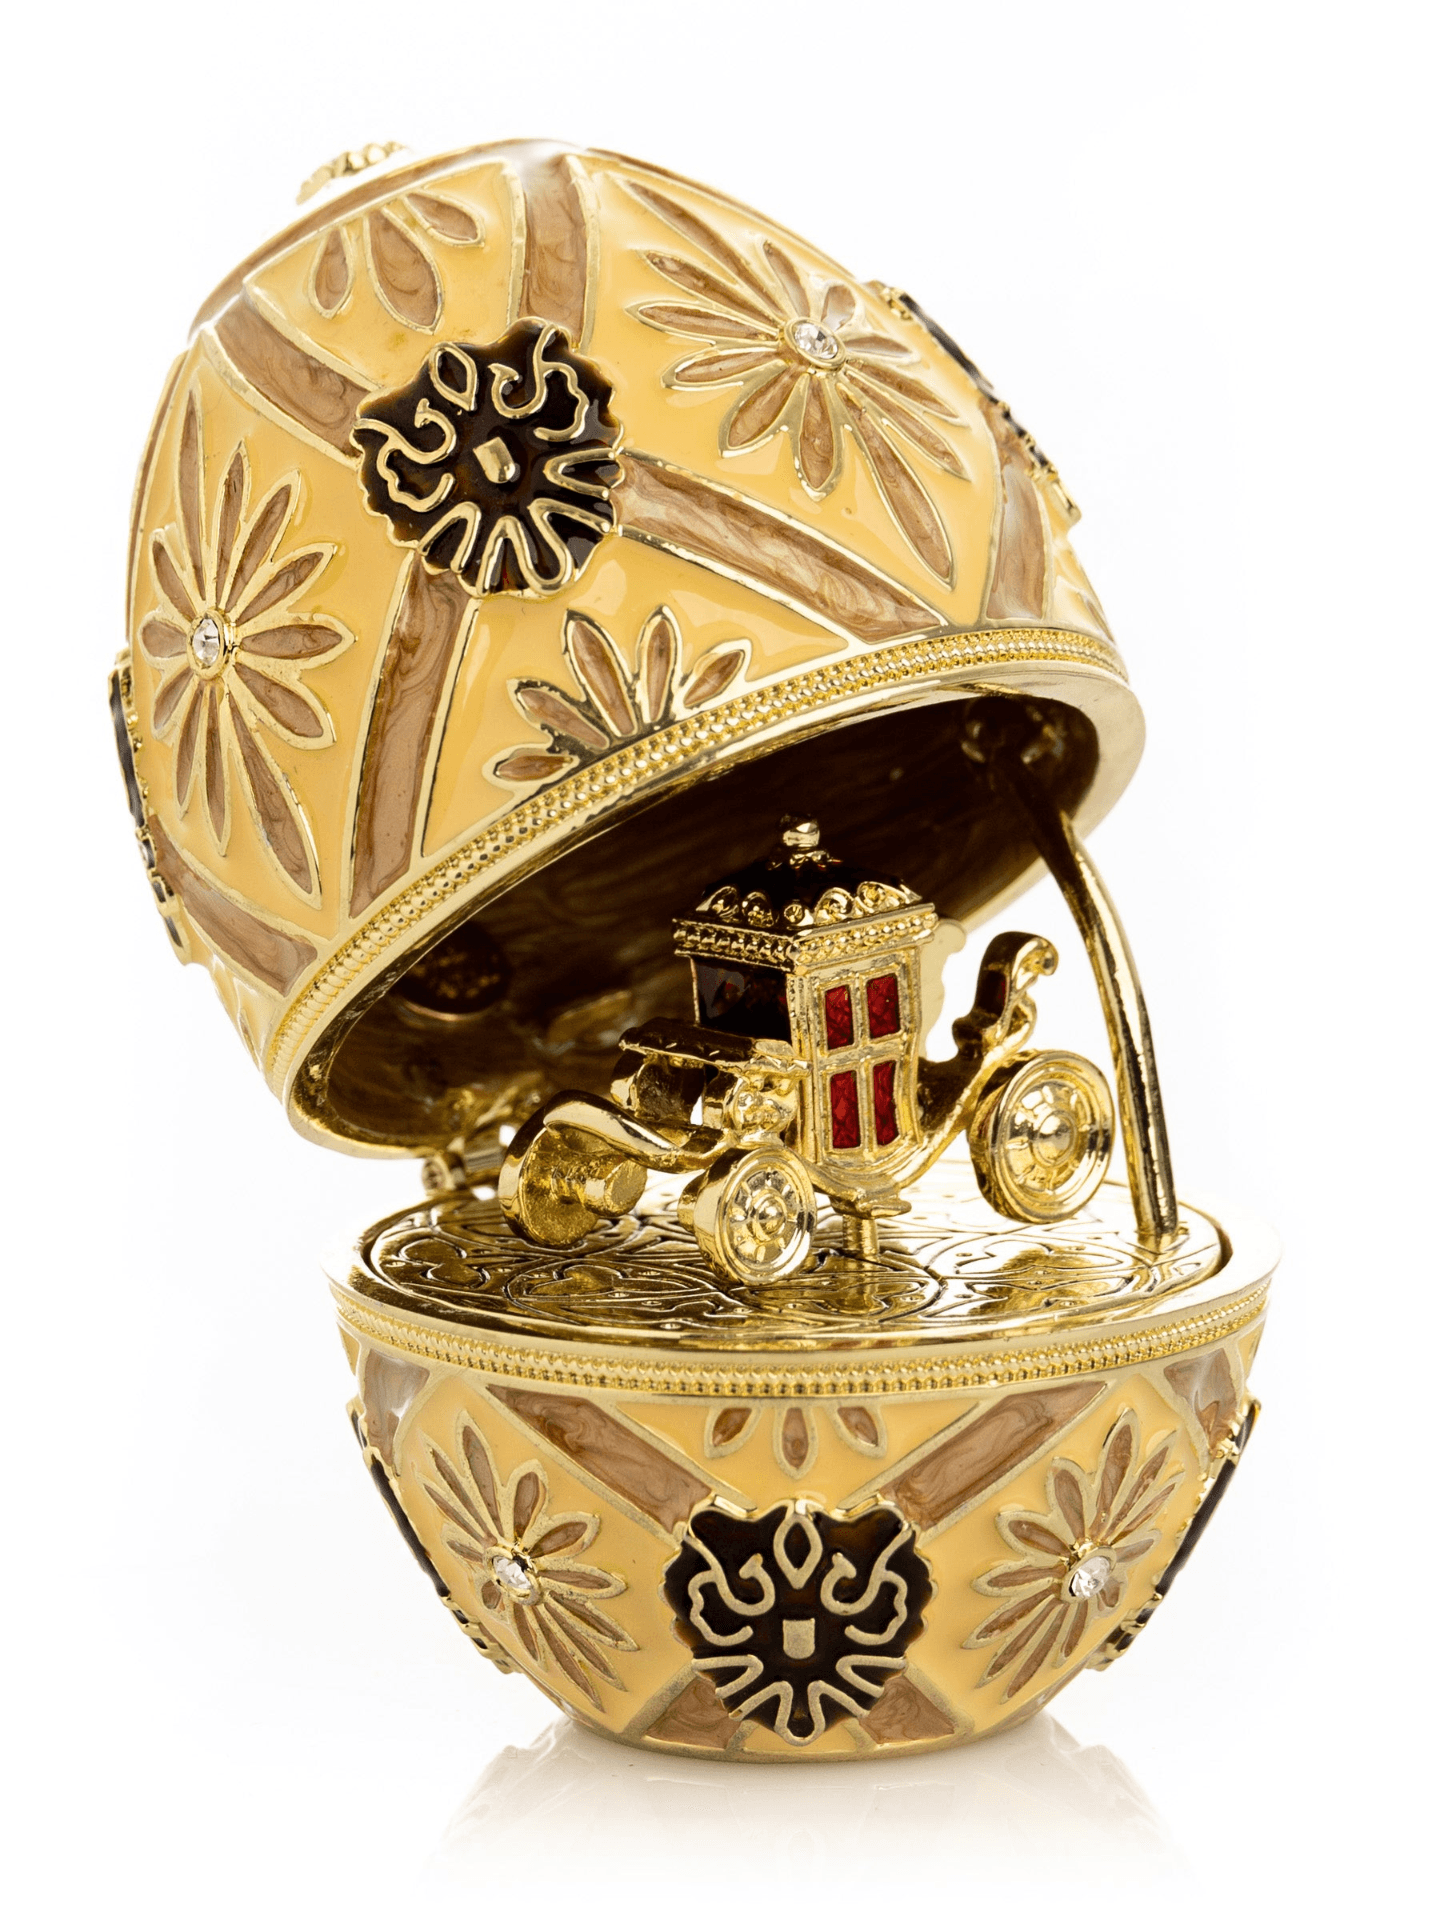 Brown Faberge Royal egg with Carriage  